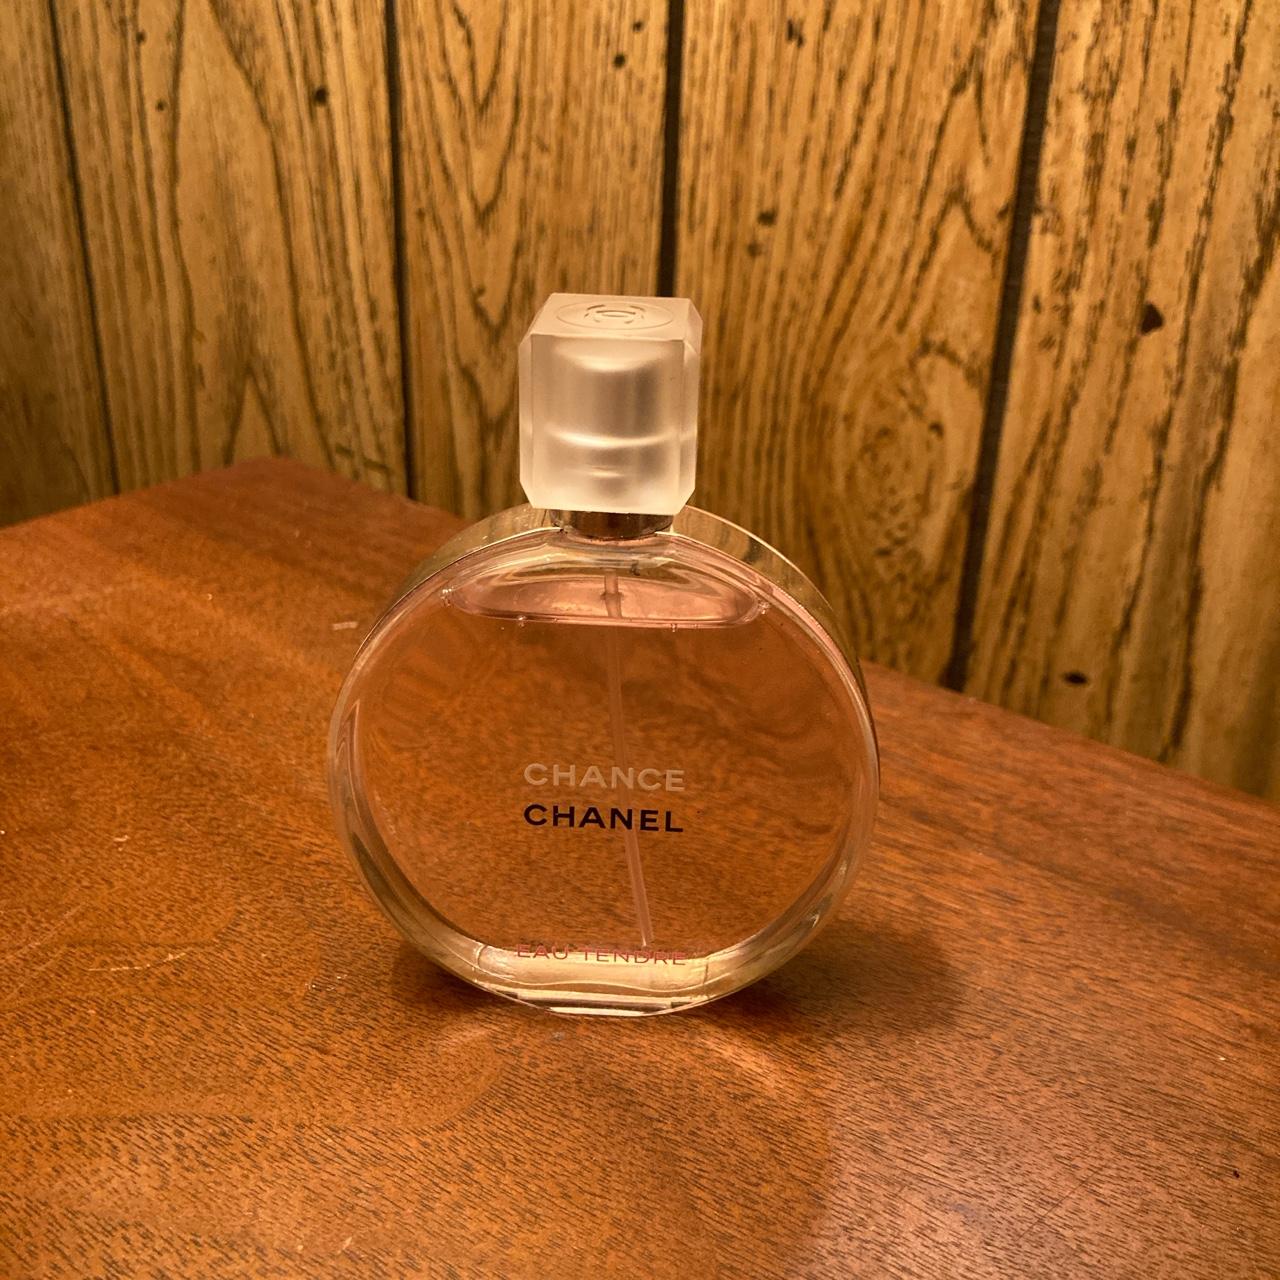 Chanel chance perfume !! ☮️🏹🃏🐊🧚🏻🍄🐏🧿🐏🗡🗣 will be - Depop